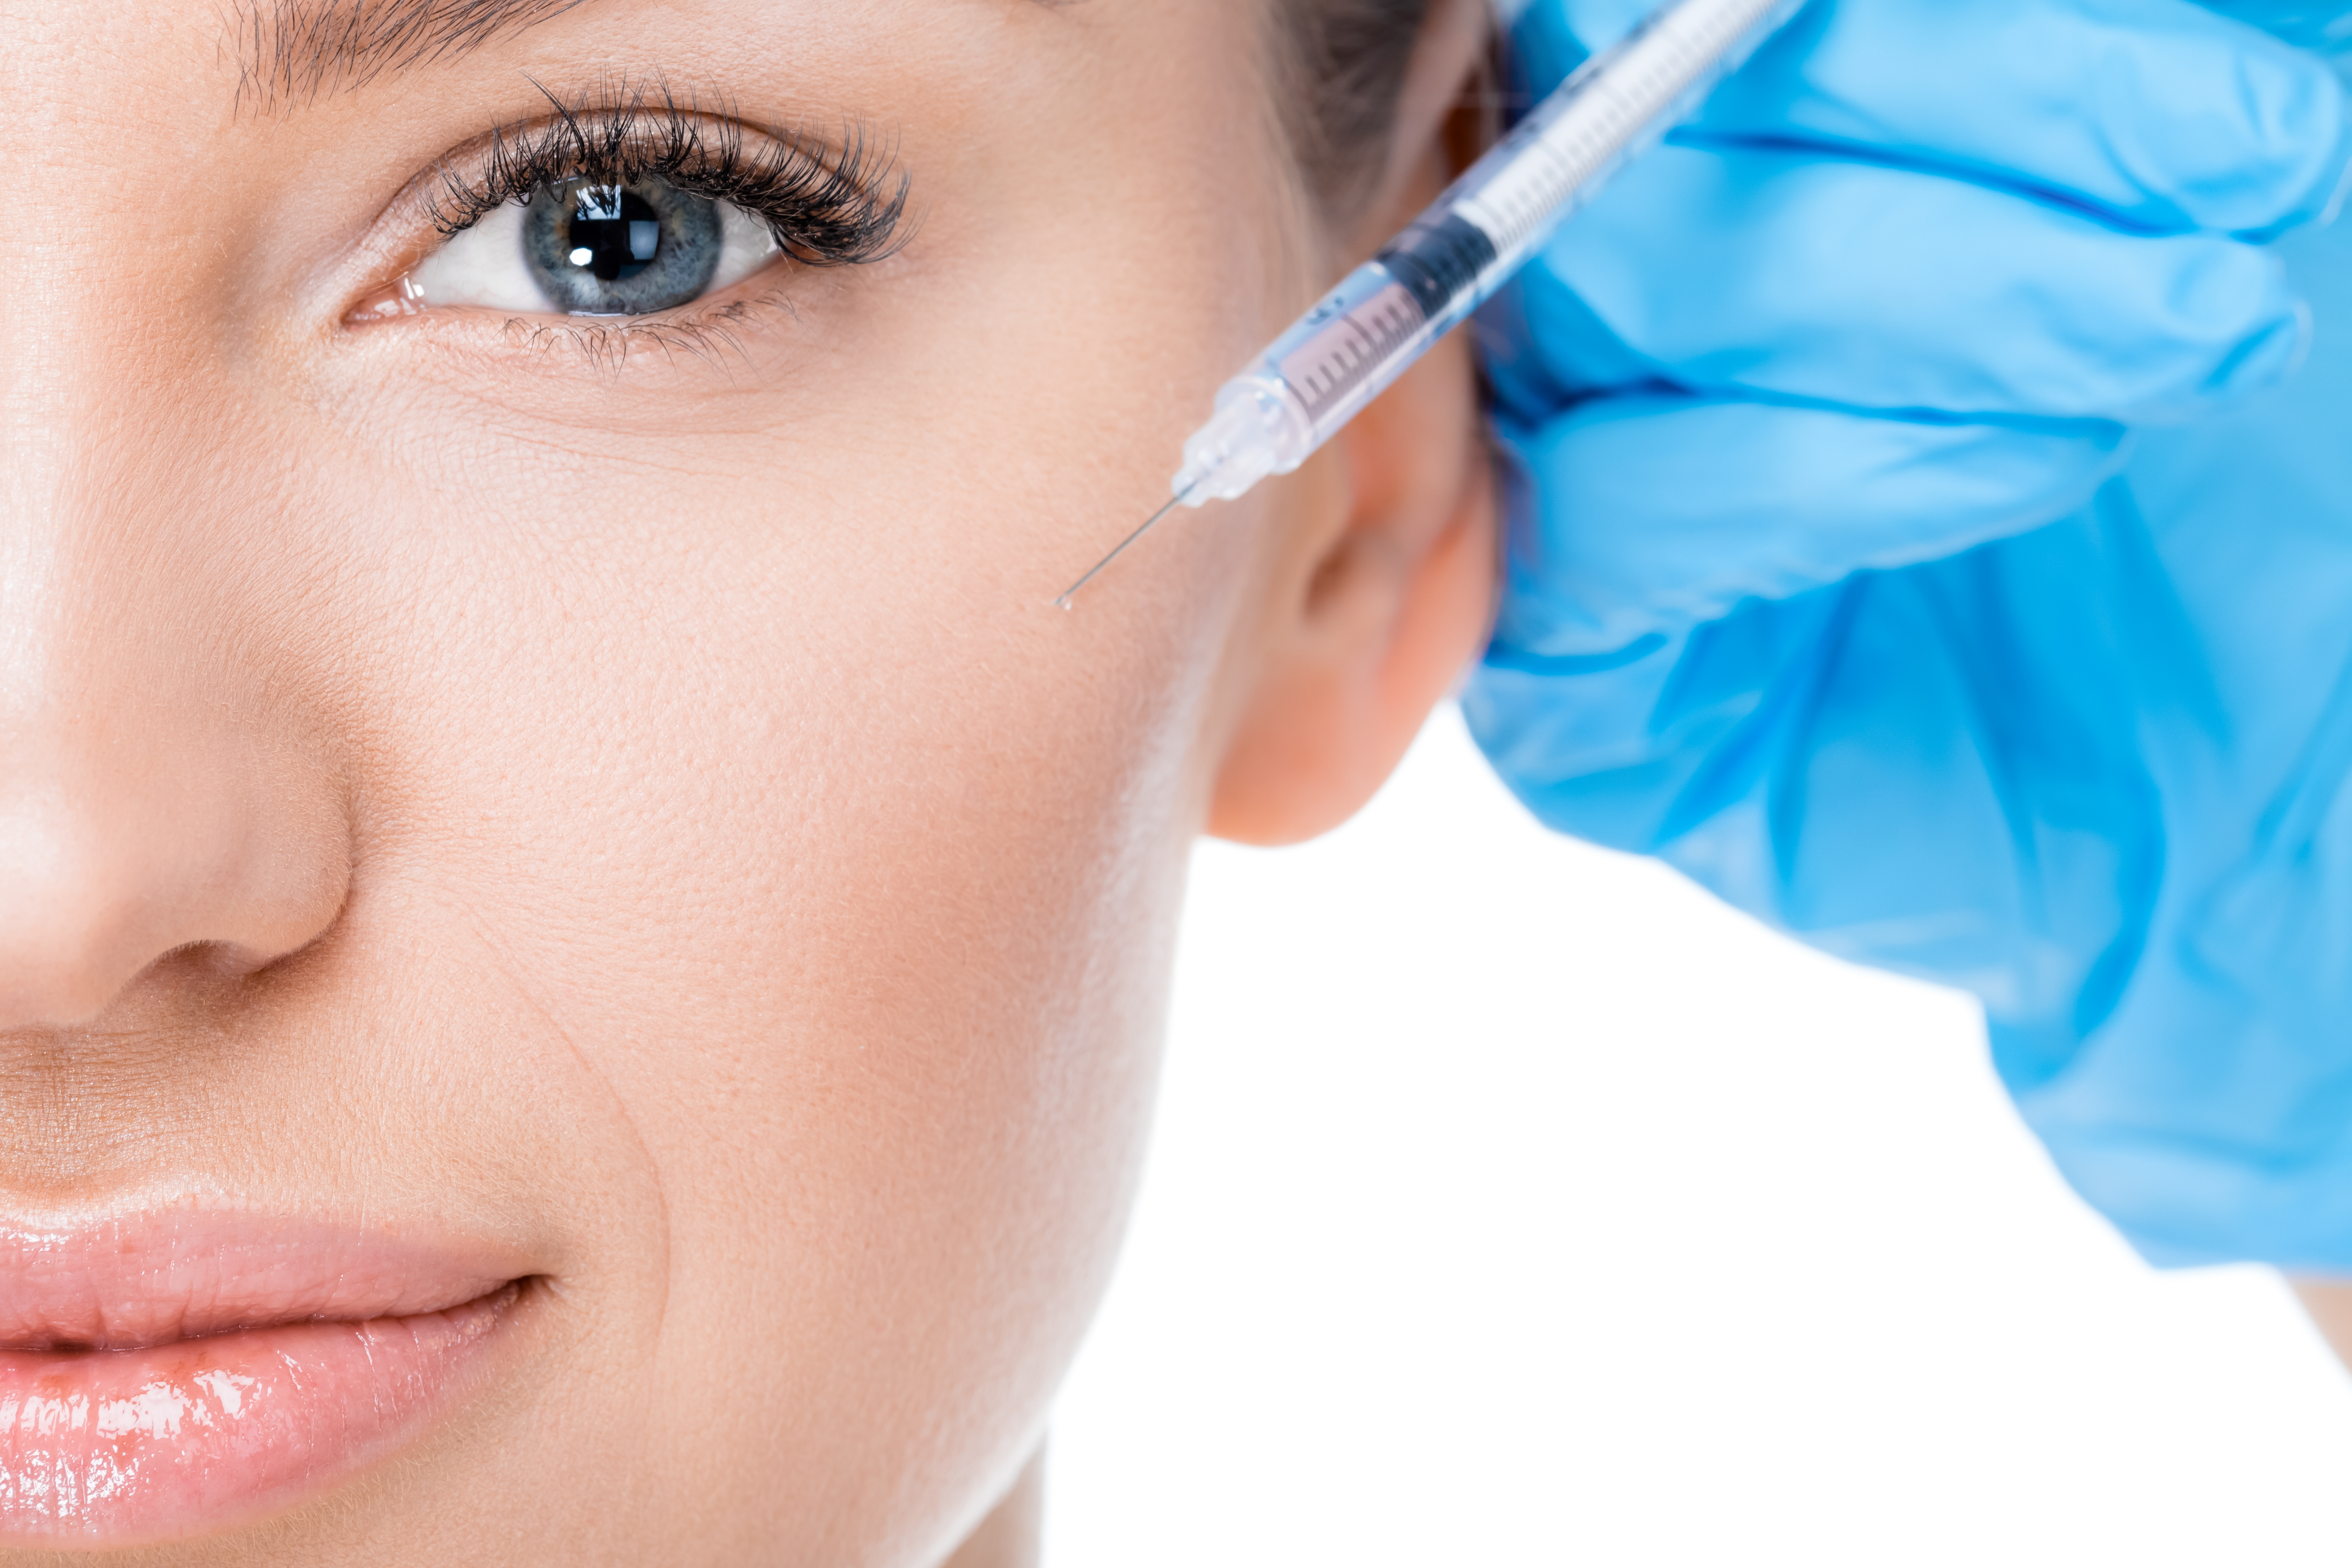 Where can I find microneedling in Orlando?